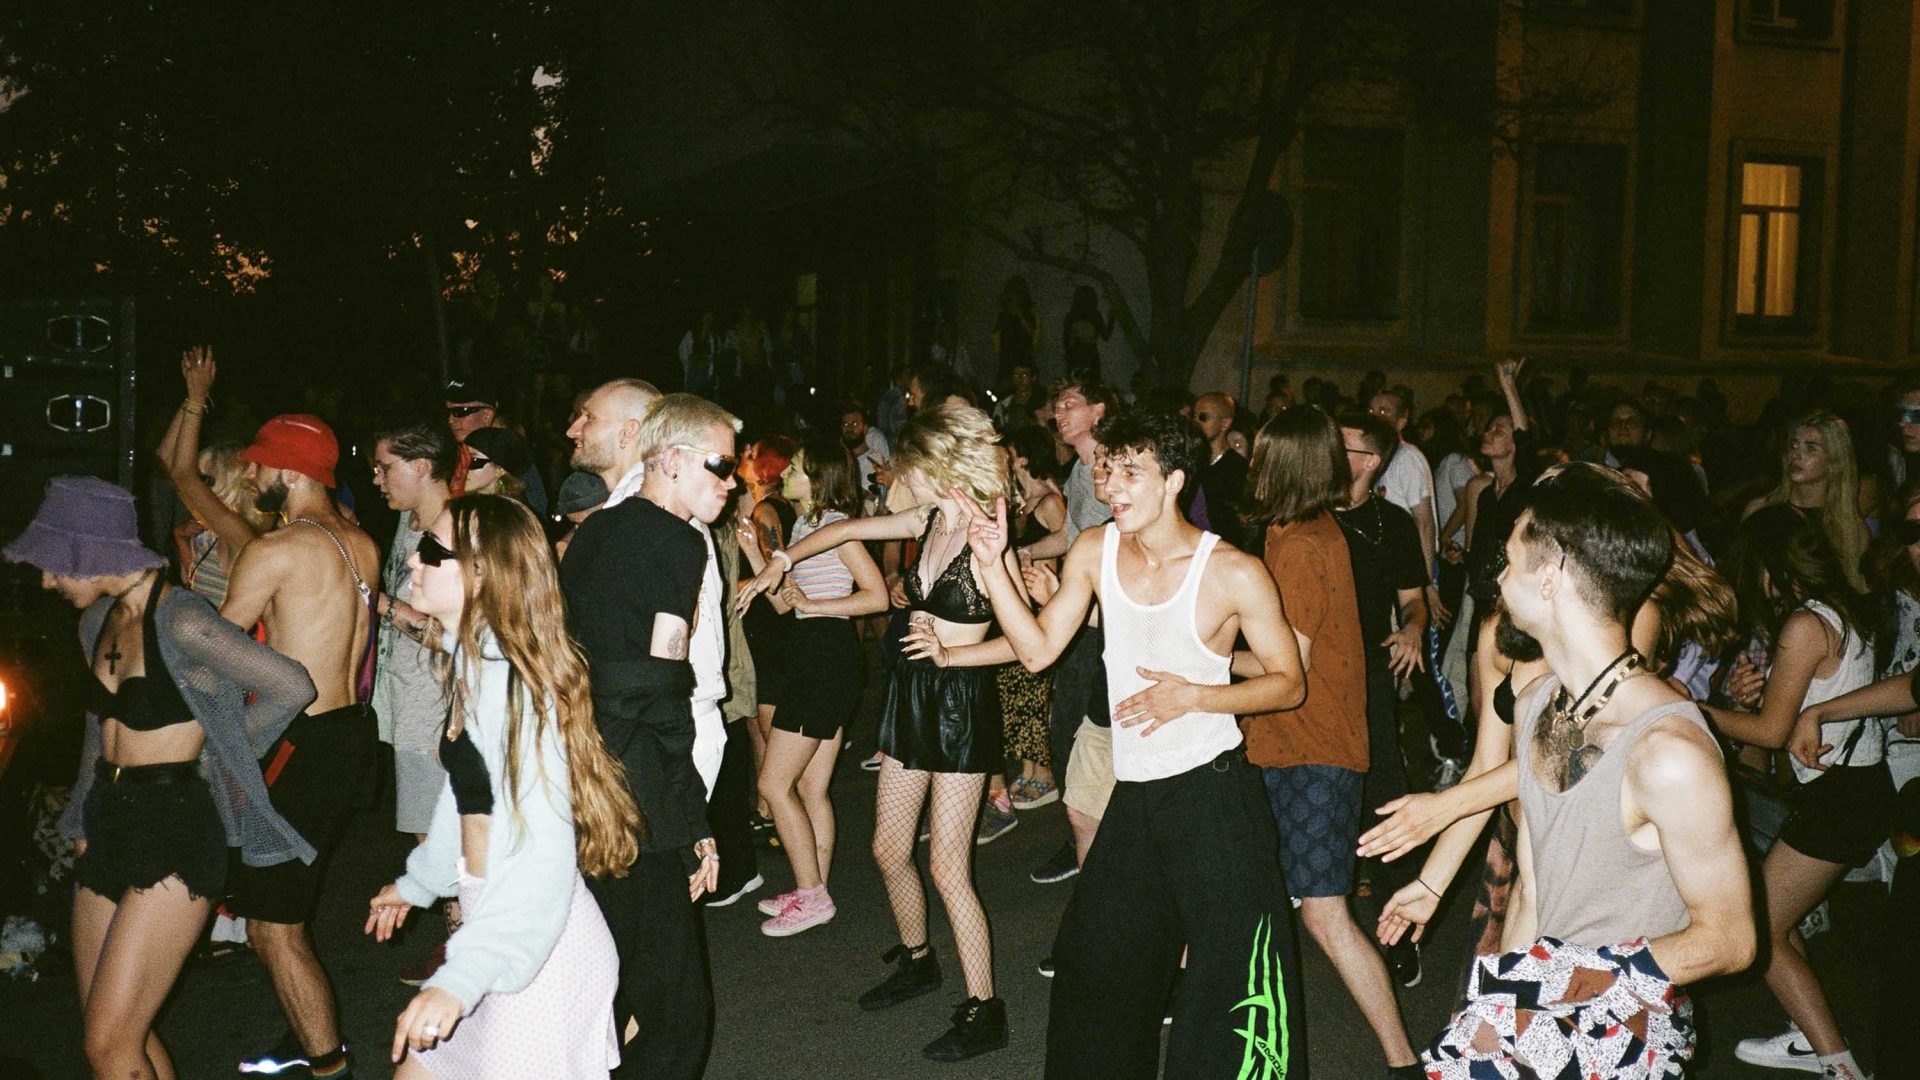 LGBTQ people dancing at a Pride event.